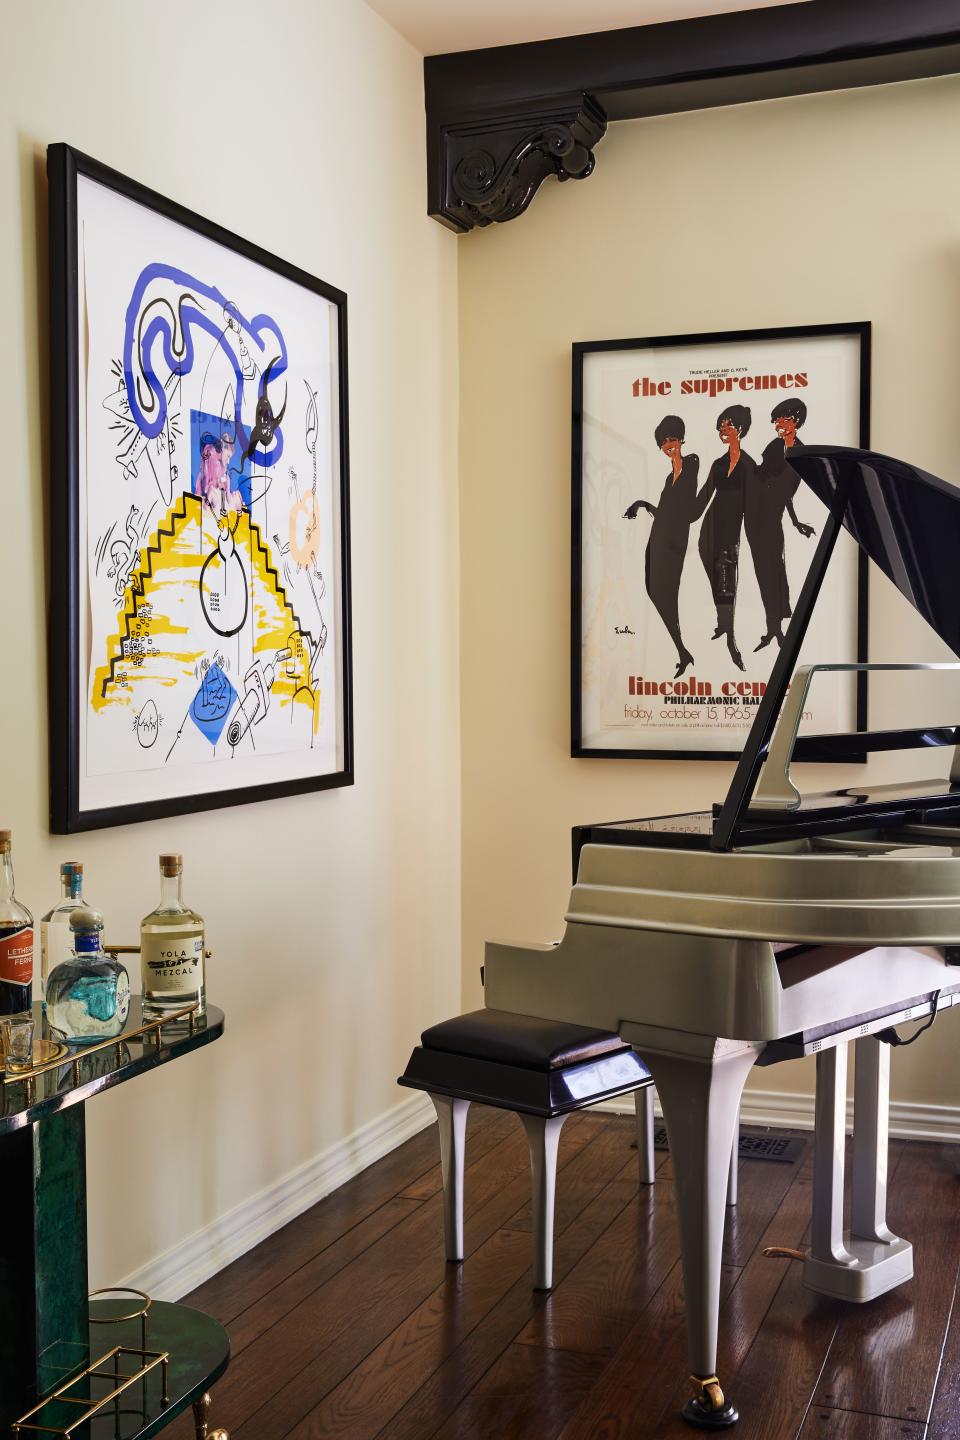 This vintage 1940s Rippen piano—made from aluminum specifically for use aboard cruise ships (lightweight and moisture-resistant)—is more than pure ornament. When Ronson isn’t playing it, the piano has a built-in player that entertains. The drawing on the left is by Keith Haring. “He’s forever linked with my memories of living in New York,” says Ronson. “It was a fairly inexpensive print, and maybe the first thing I ever bought—when I was 25 and DJing in New York.” The poster to the right is an announcement for the Supremes’ sold-out one-night-only concert at Lincoln Center in the fall of 1965.